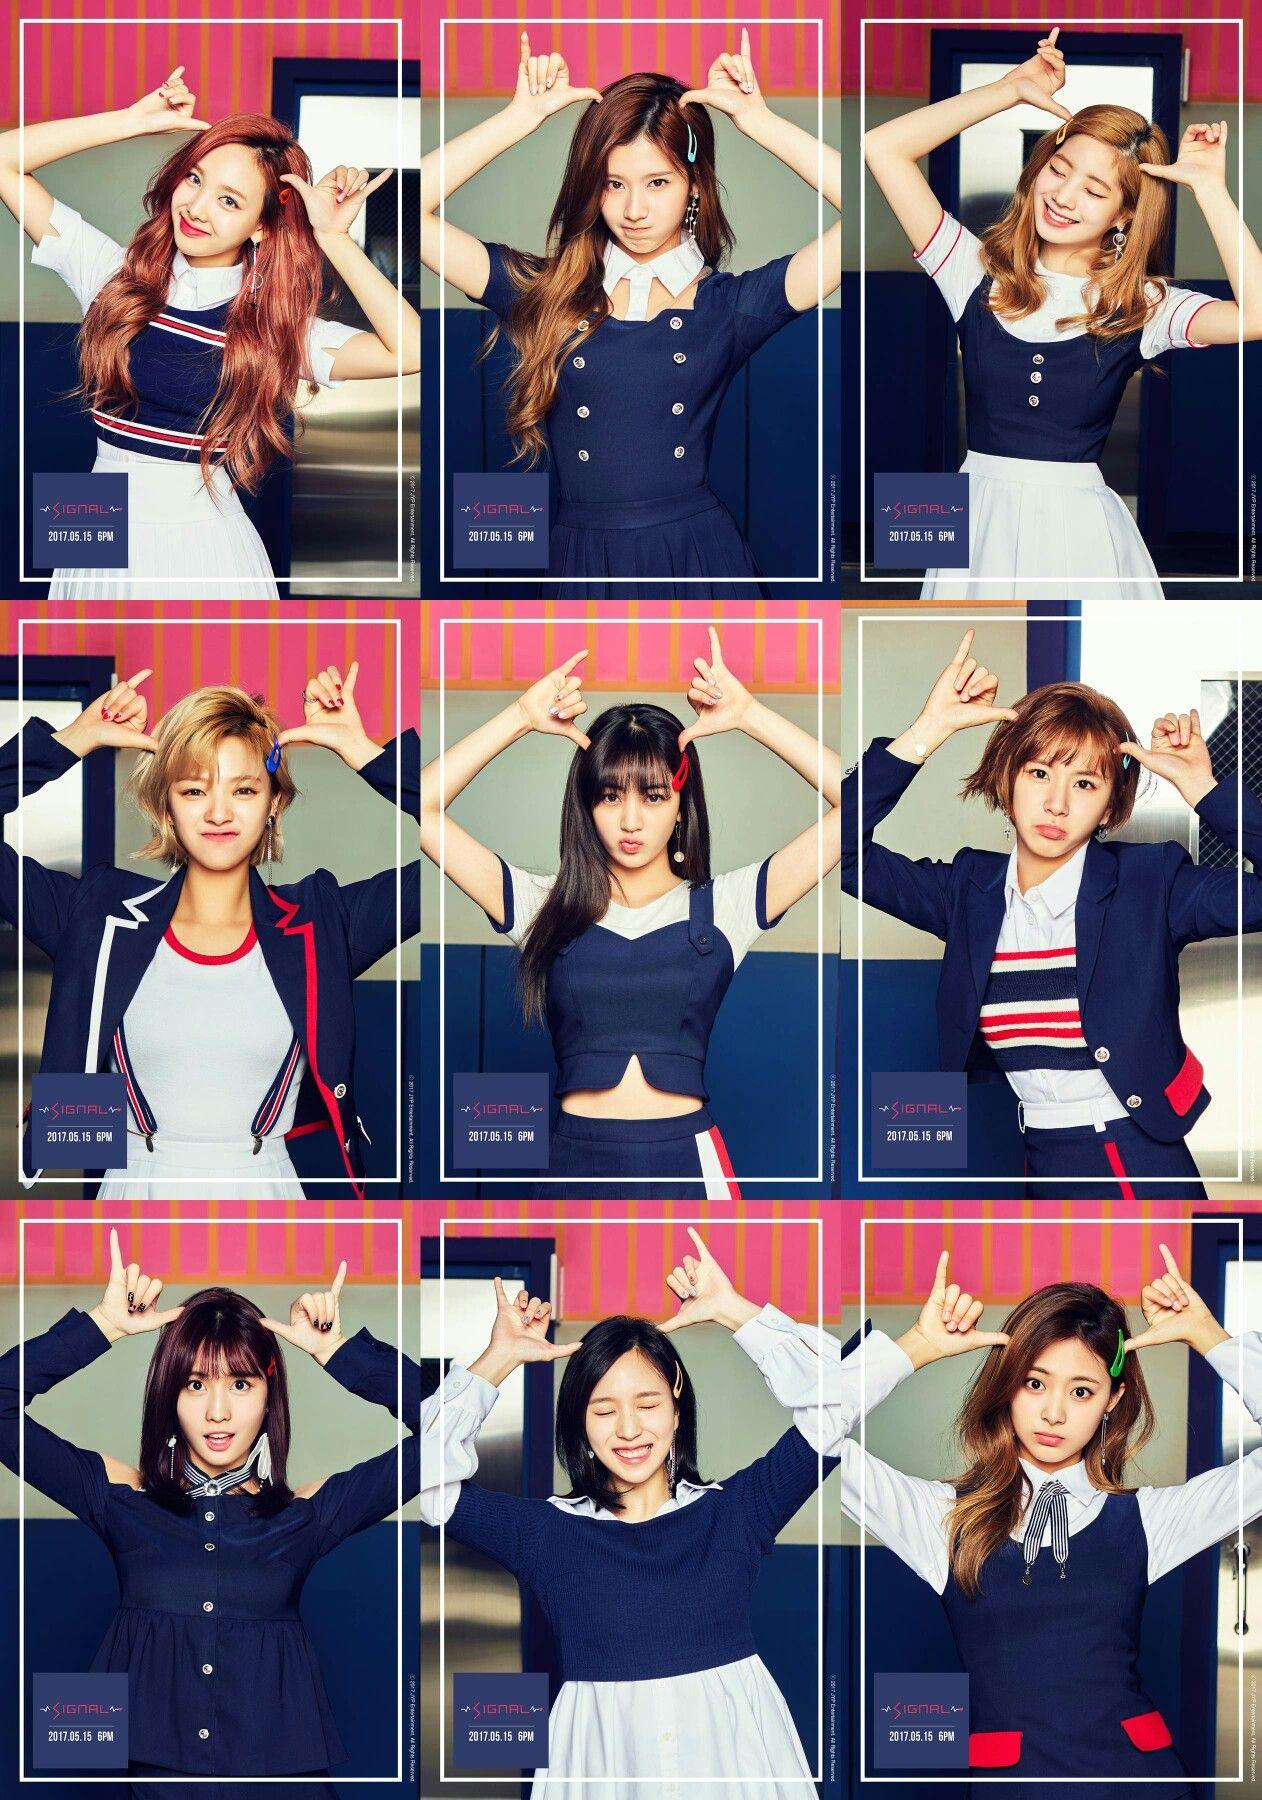 Signal Twice Wallpapers Wallpaper Cave